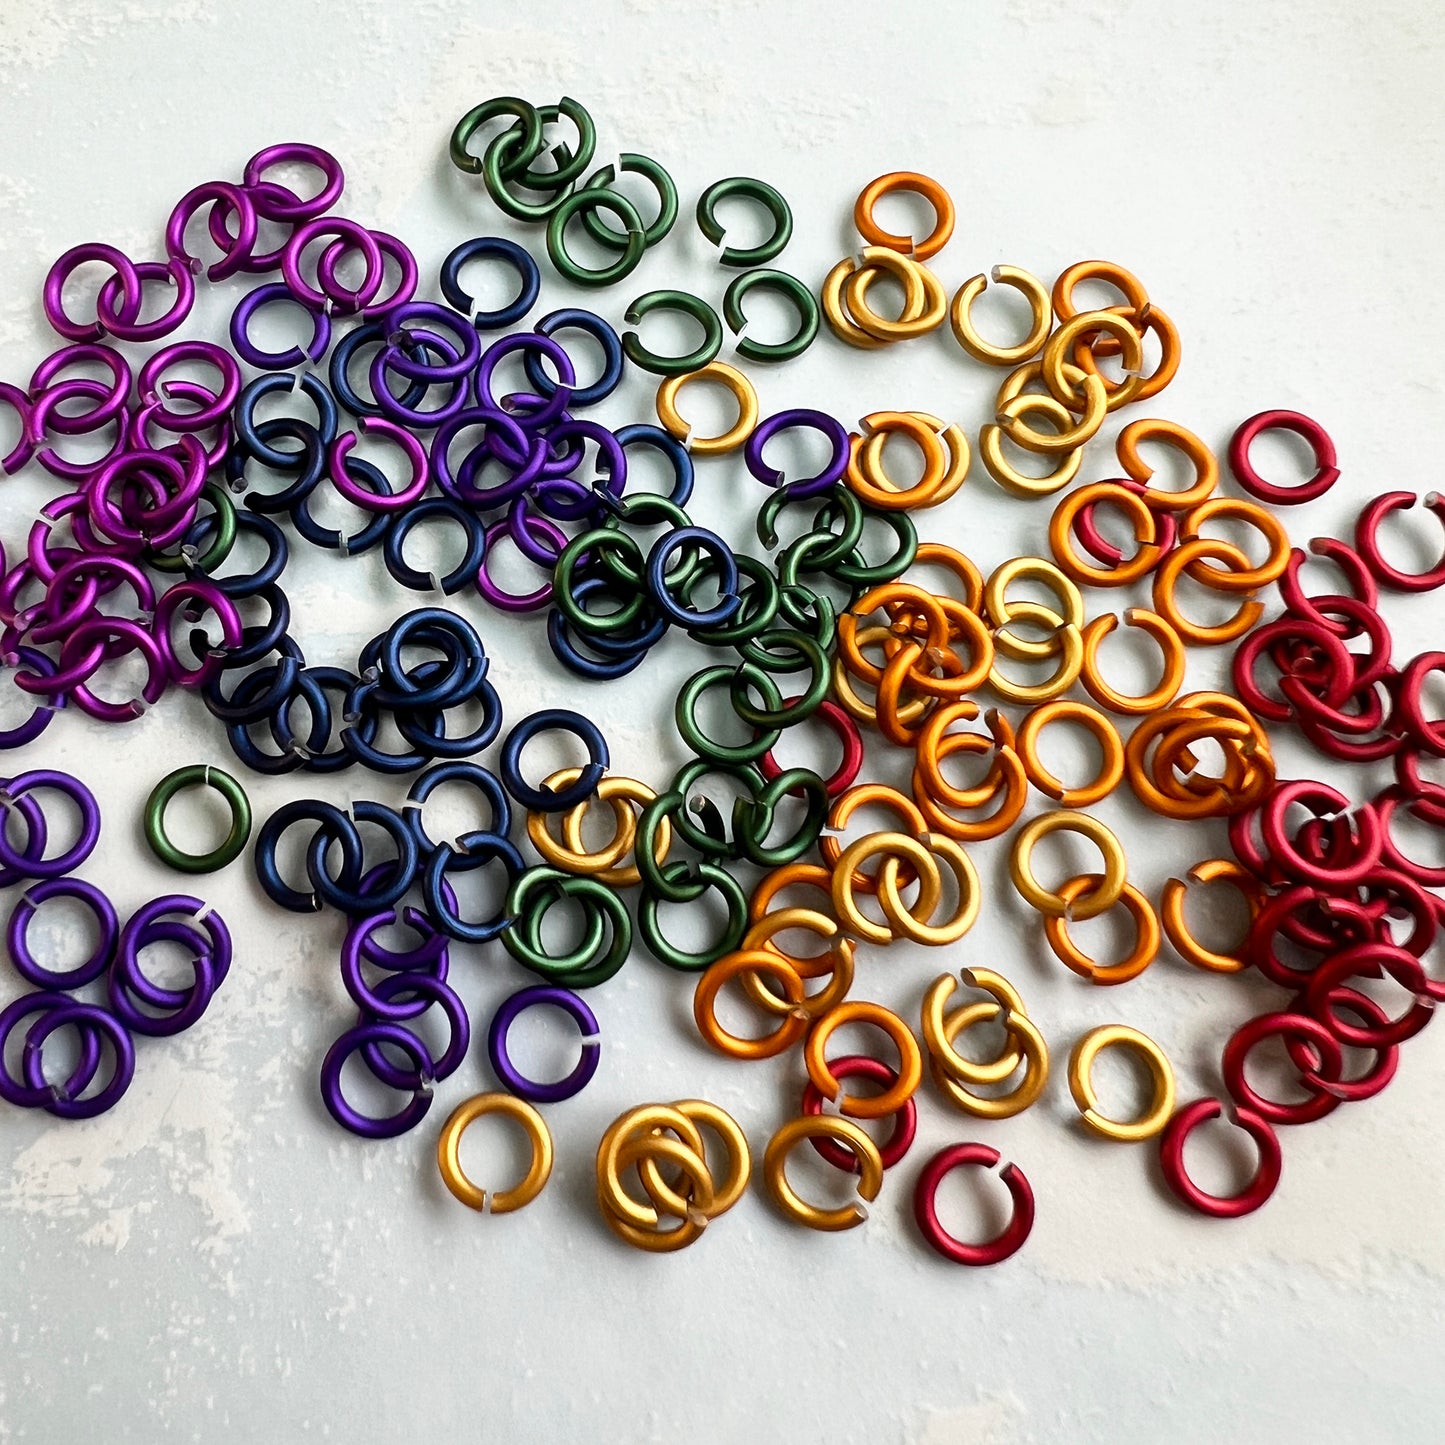 18g 5/32" SWG Jump Rings Rainbow Mixed - hand picked- choose matte or shiny